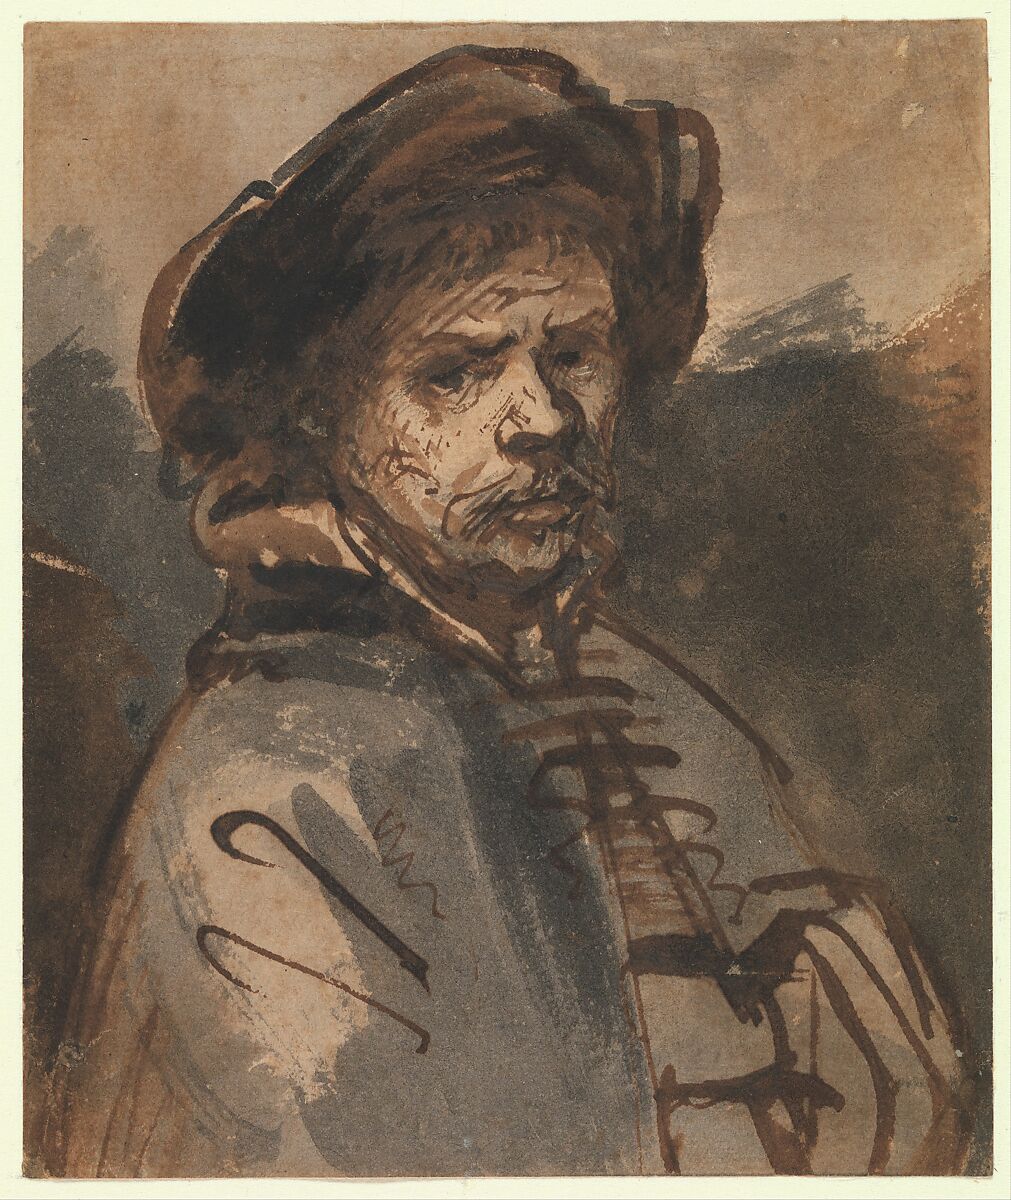 Self-Portrait, Rembrandt (Rembrandt van Rijn) (Dutch, Leiden 1606–1669 Amsterdam) (reworked by another hand), Pen and brown ink, brush and brown and gray ink, brown and gray washes. 